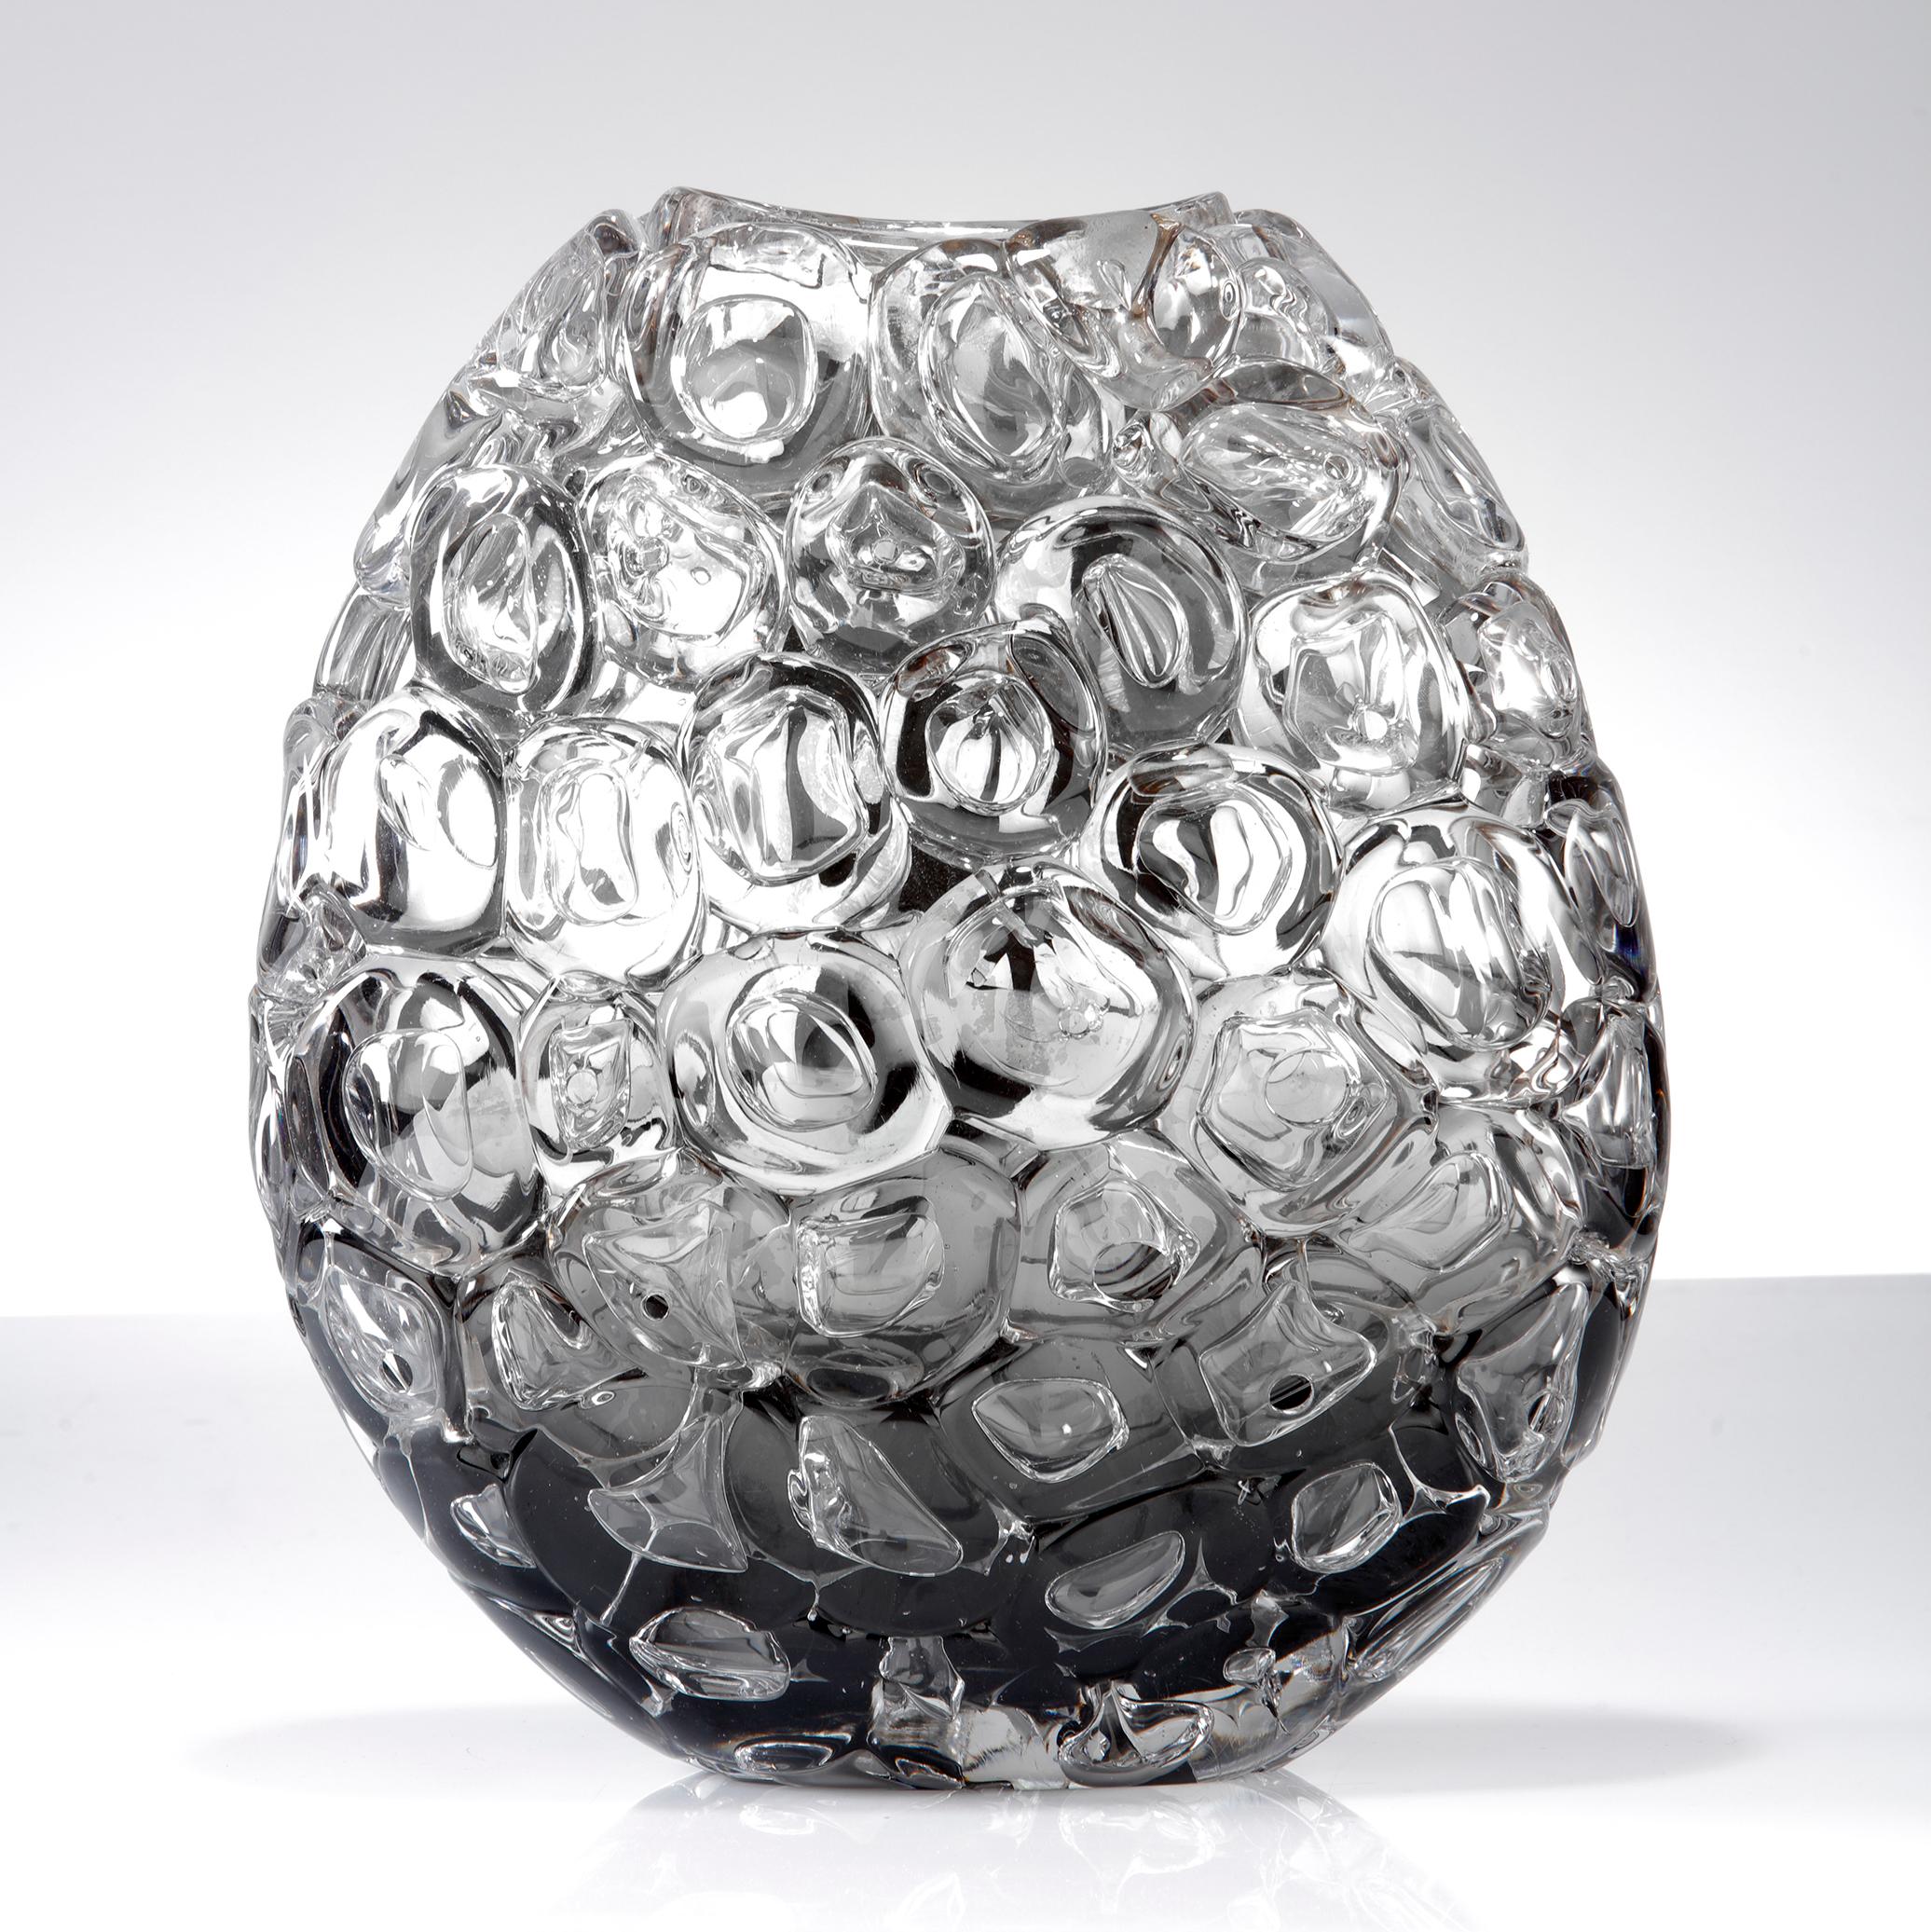 Bubblewrap in Monochrome I is a hand blown and sculpted vase created from clear and grey glass, with a mirrored interior by the British artist Allister Malcolm. Playful yet elegant, Malcolm has formed oversized bubbles on the exterior of this